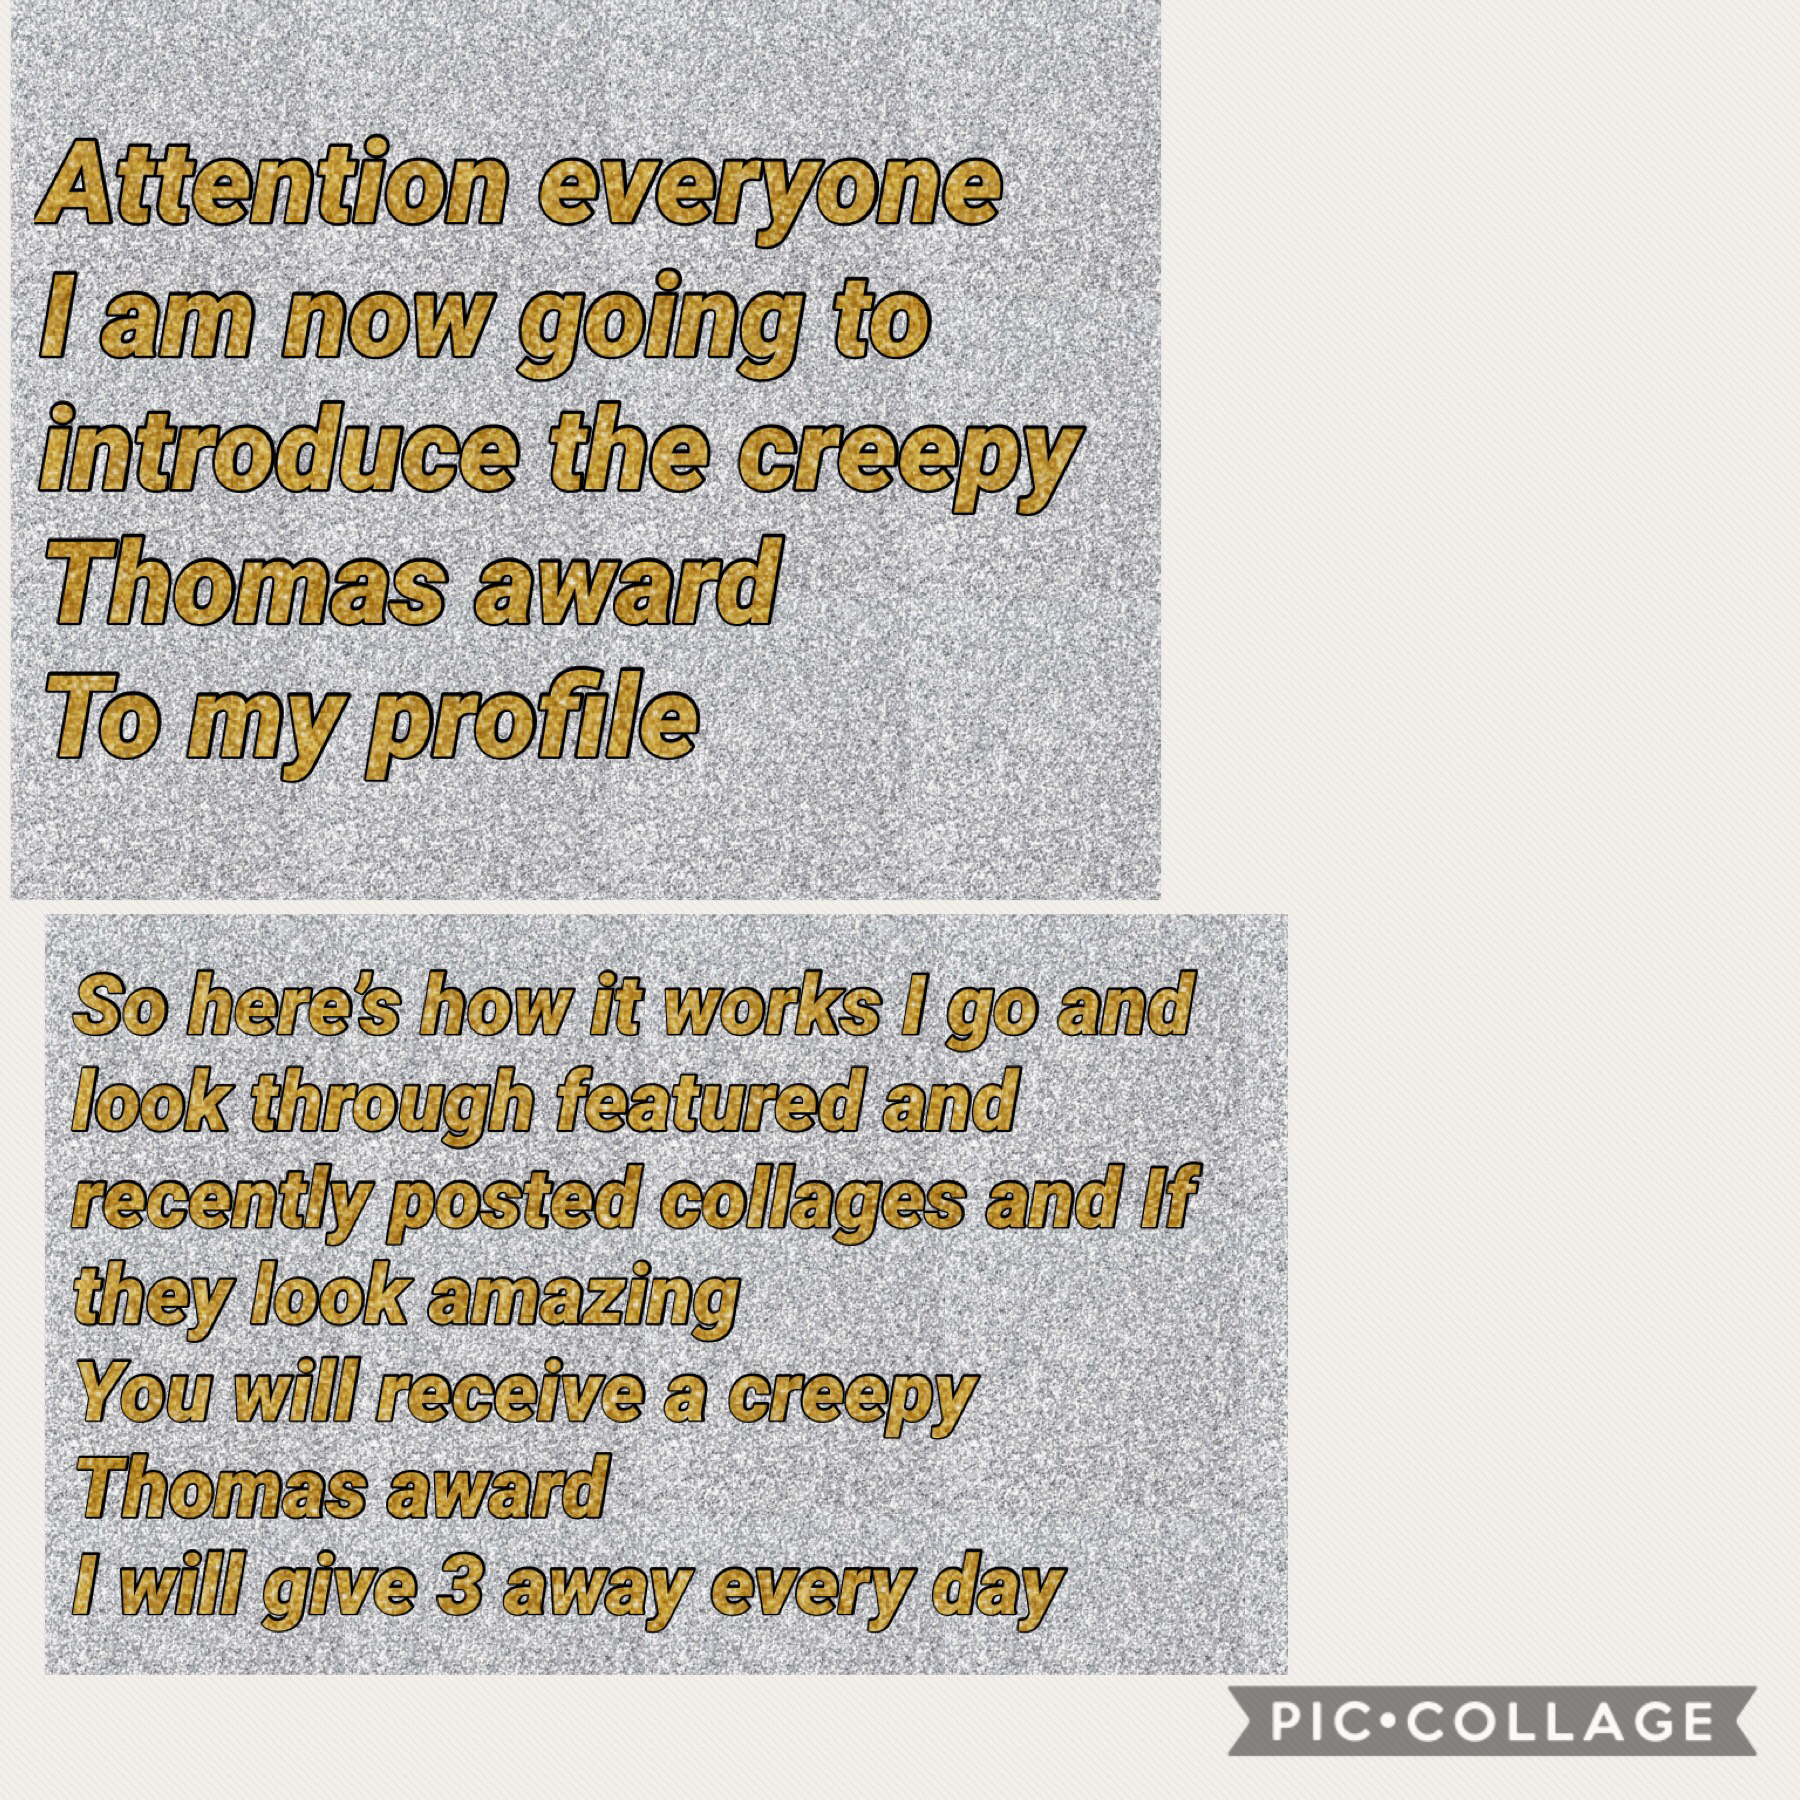 Announcement  -tap-



I will also shout out the creepy Thomas award winners 